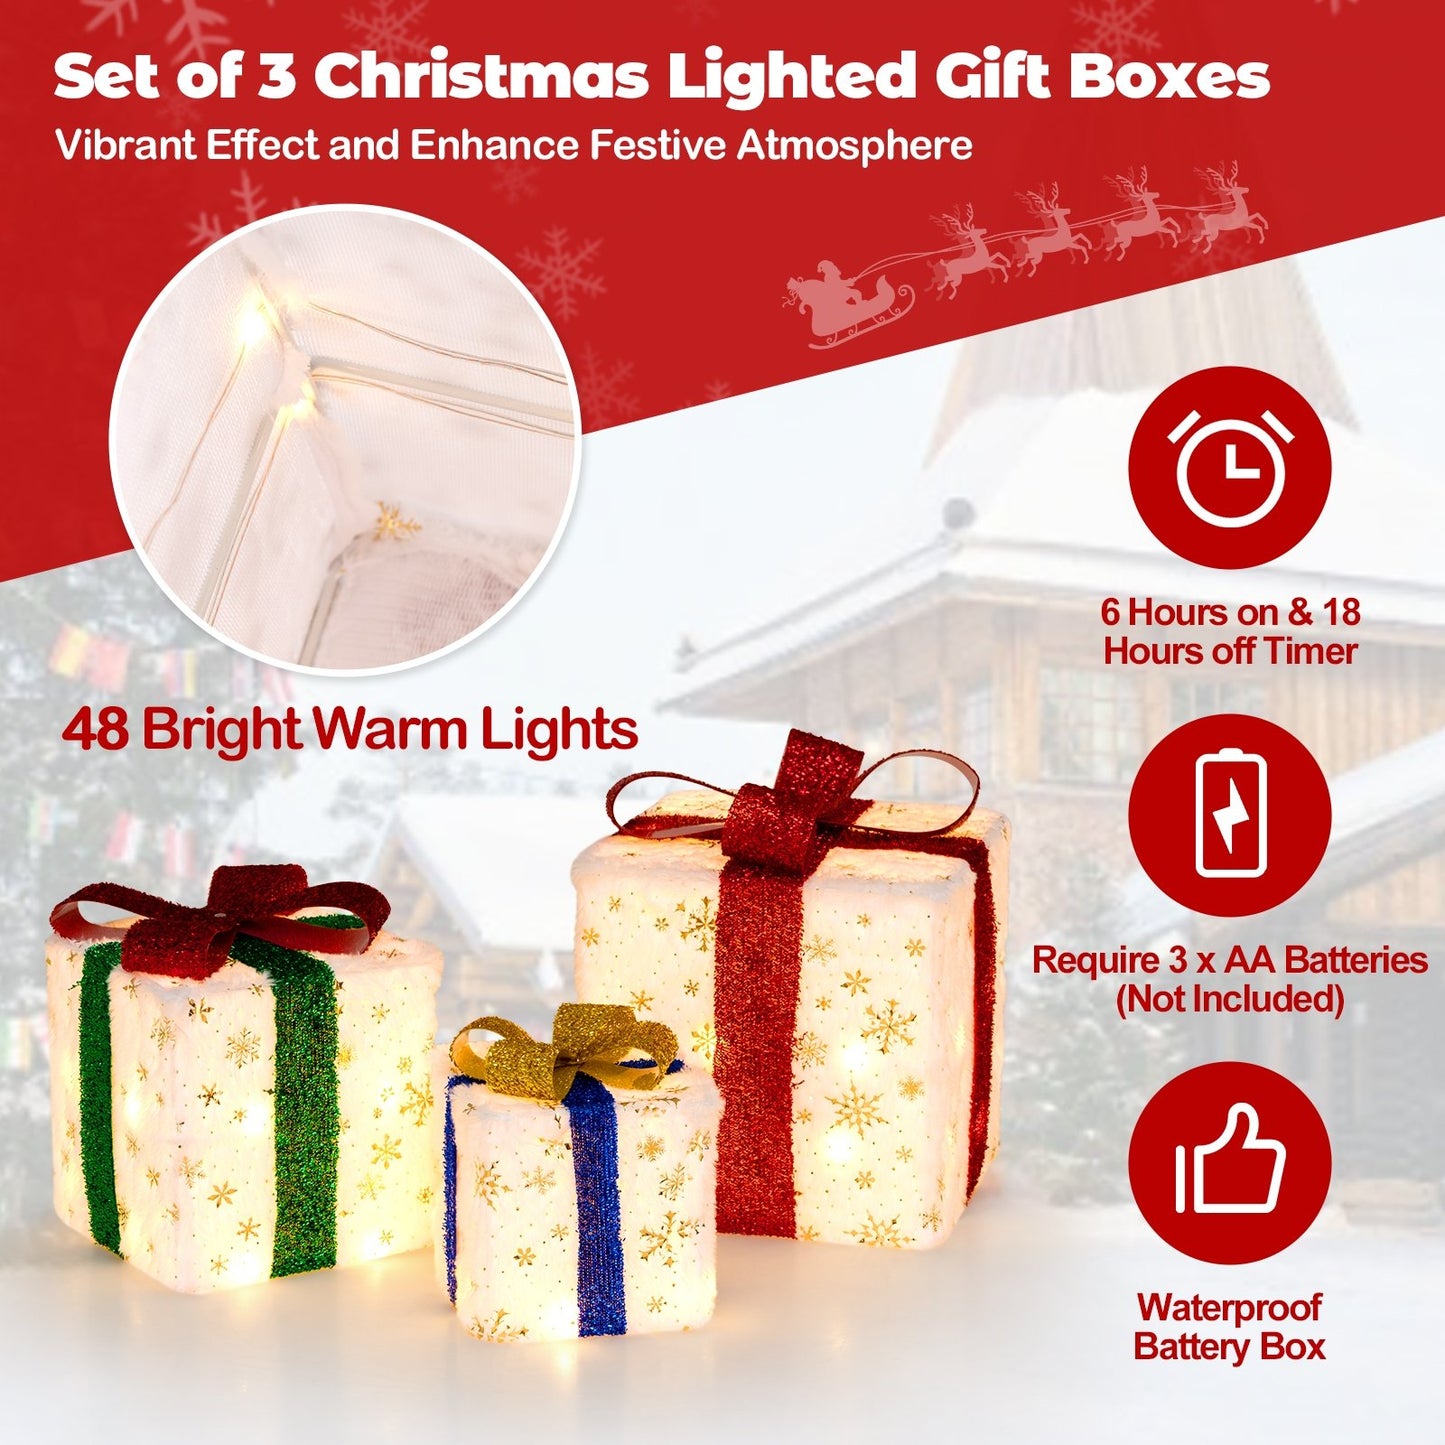 Set of 3 Christmas Lighted Gift Boxes with 48 Bright Warm Lights